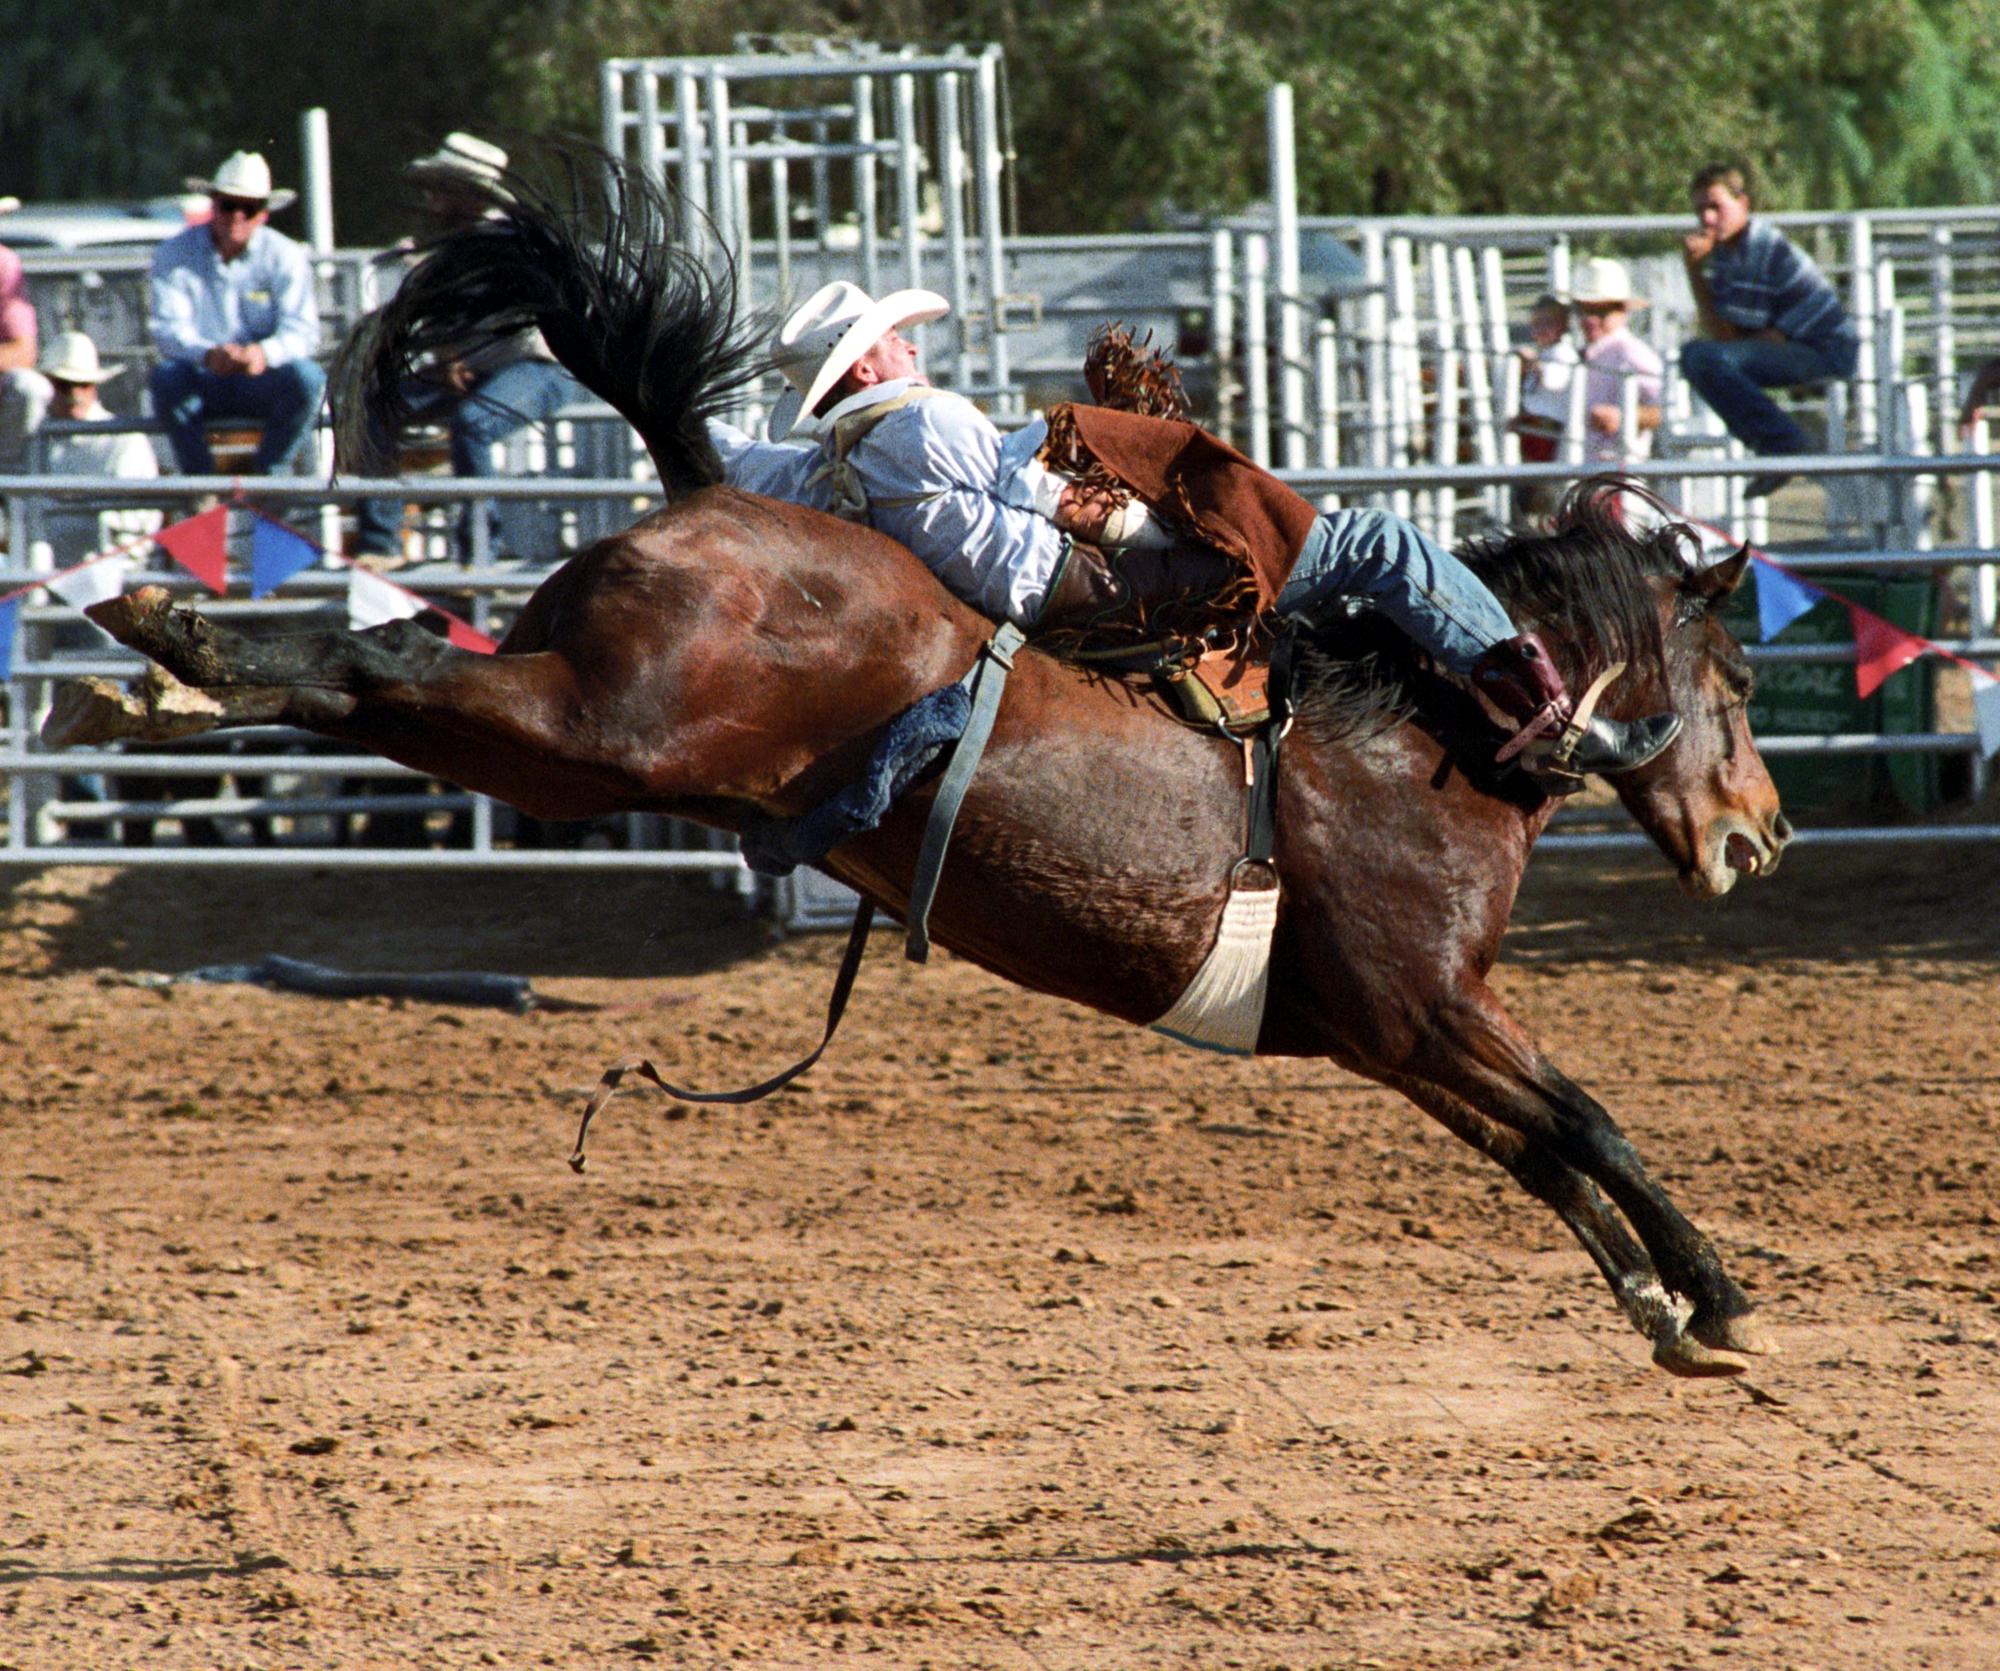 Imperial Valley Rodeo (1992) - Saddle Bronc #15